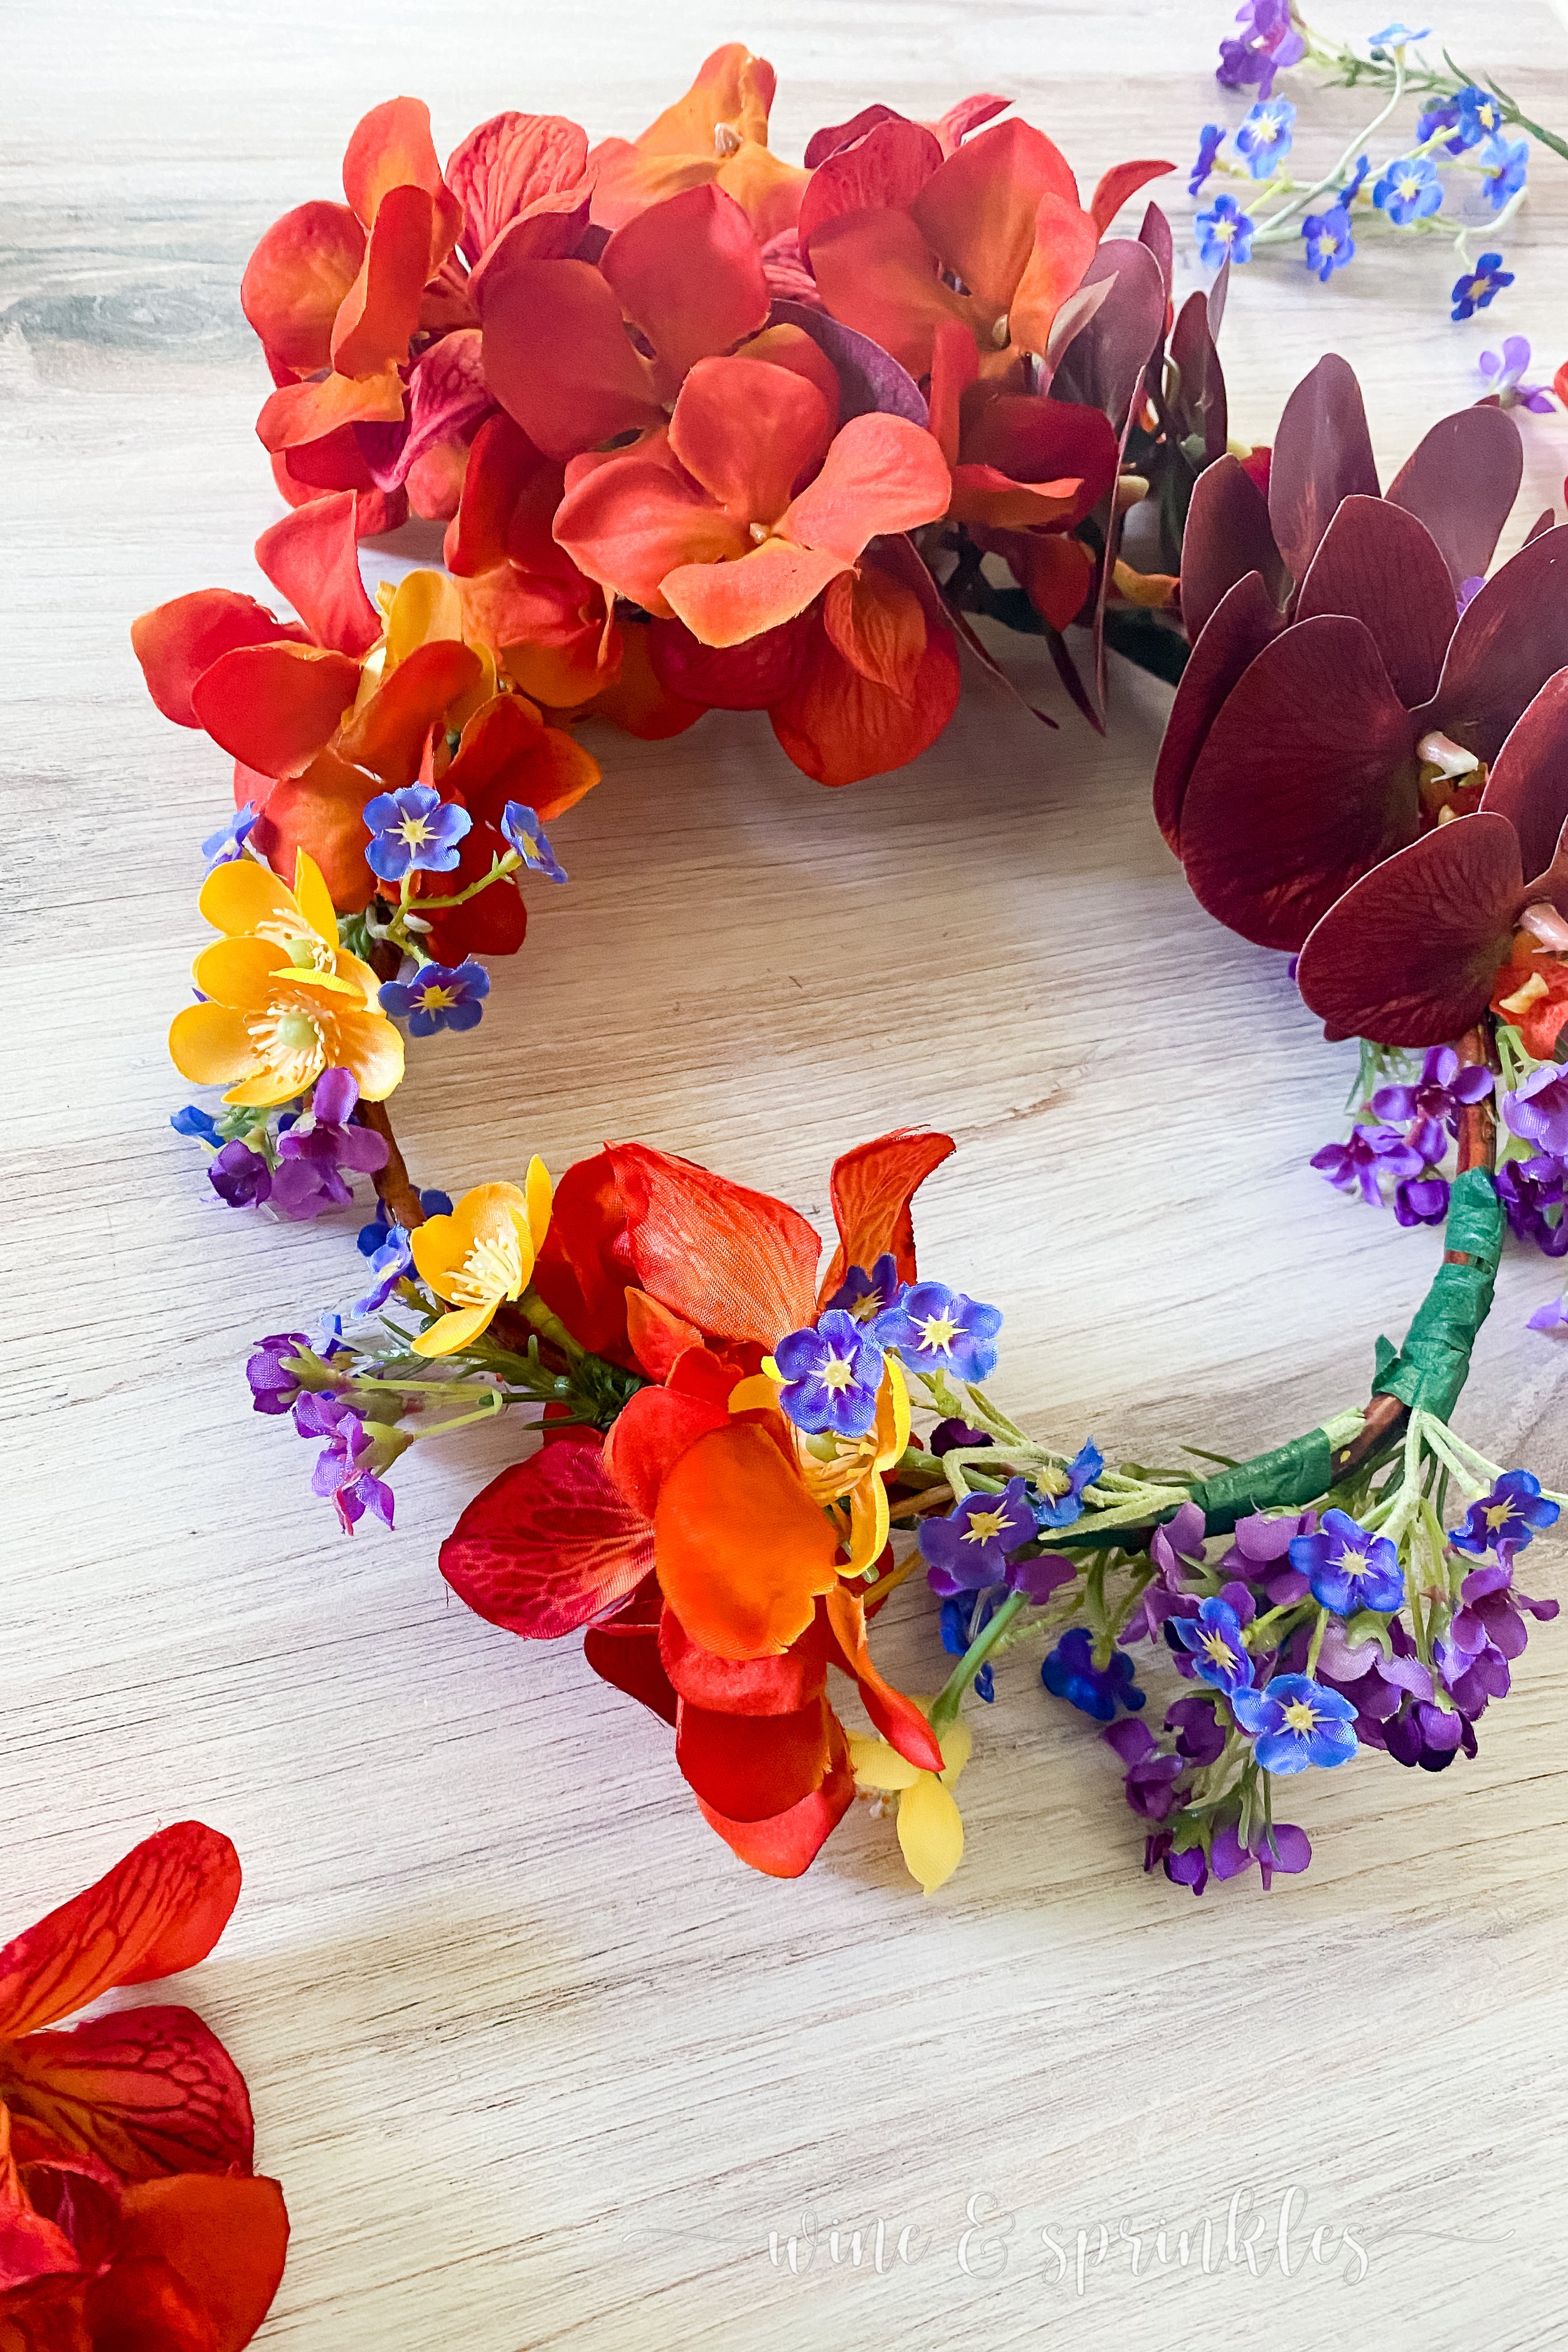 DIY silk ribbons: cutting & coloring - Stitch Floral